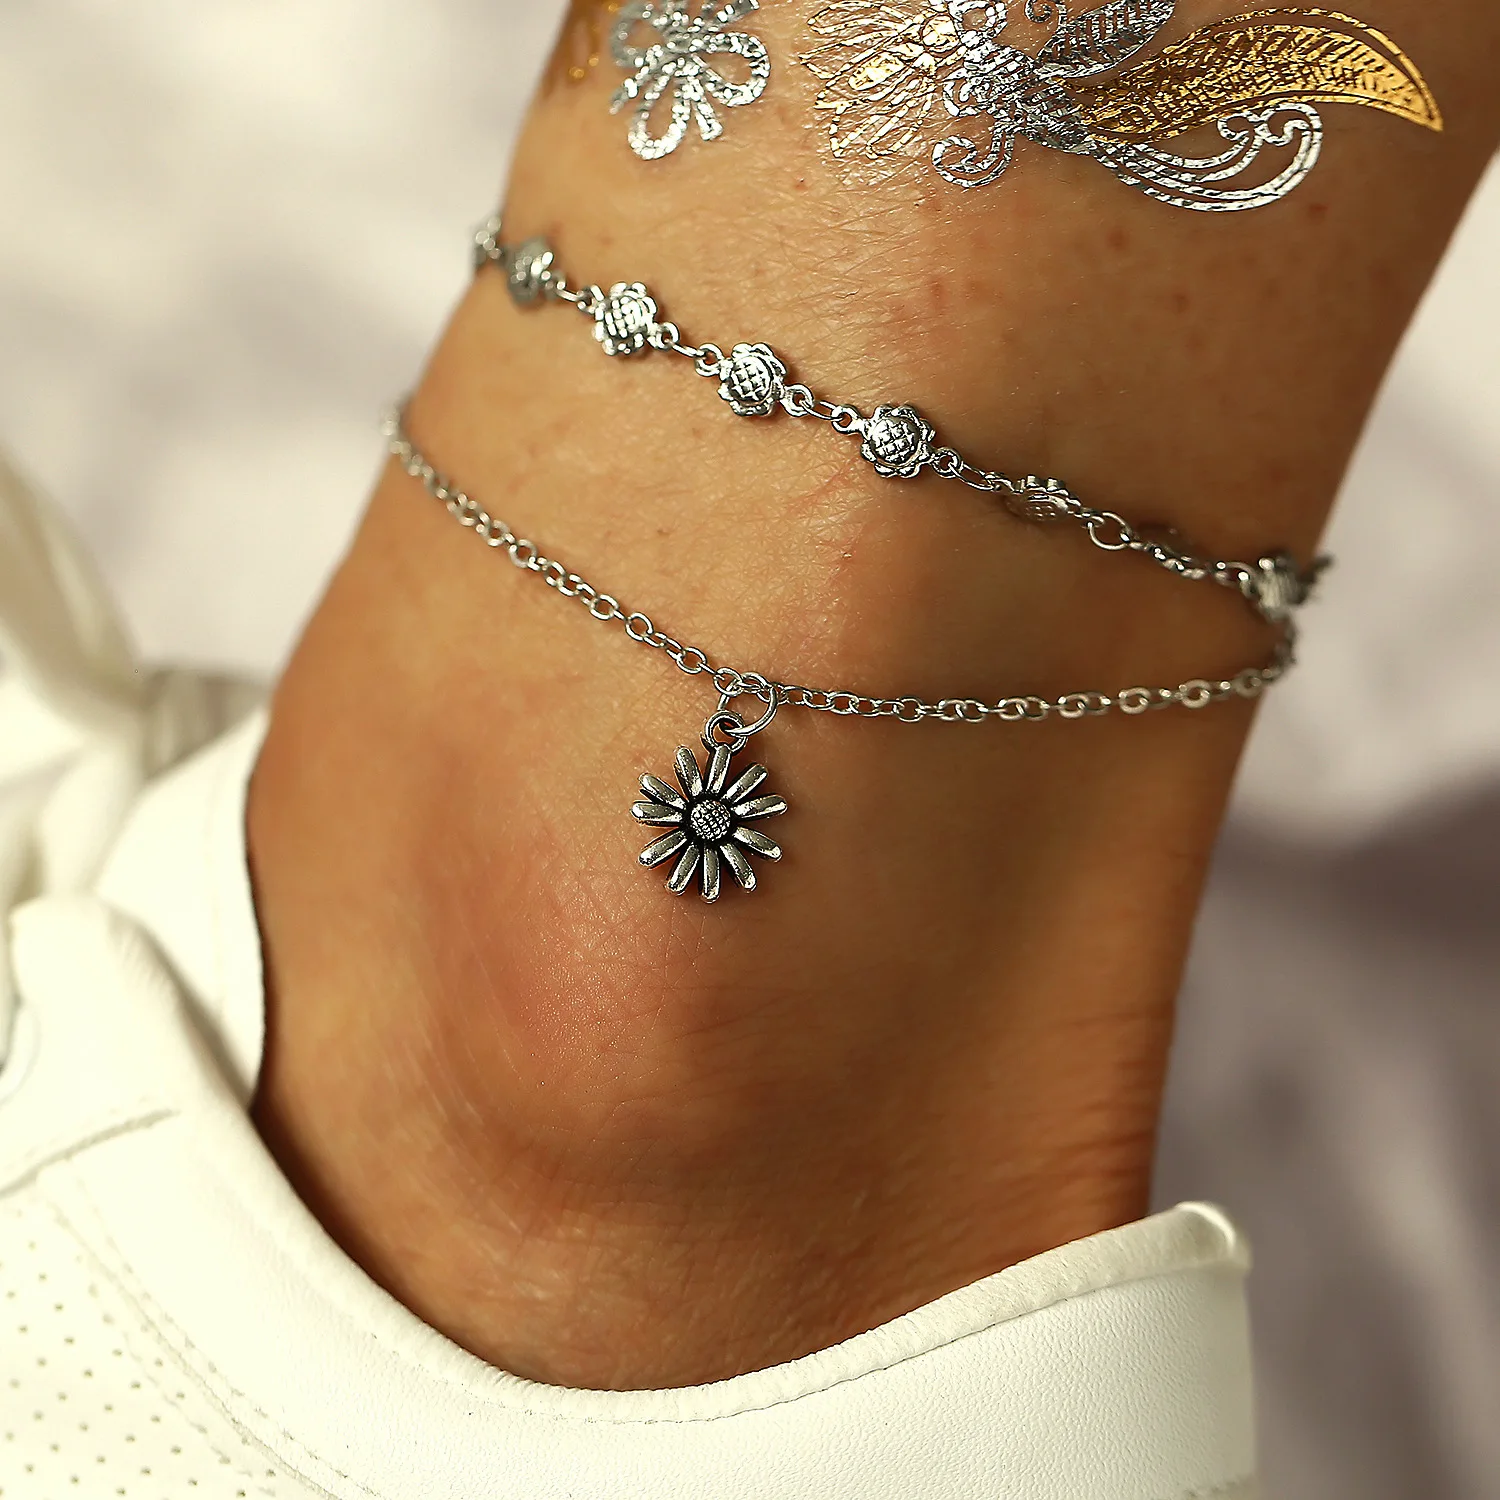 

Vintage Multilayer Anklets For Women Moon Sun Stars Daisy Bee Shell Pendant Charm Anklet Bohemia Foot Beach Barefoot Jewelry